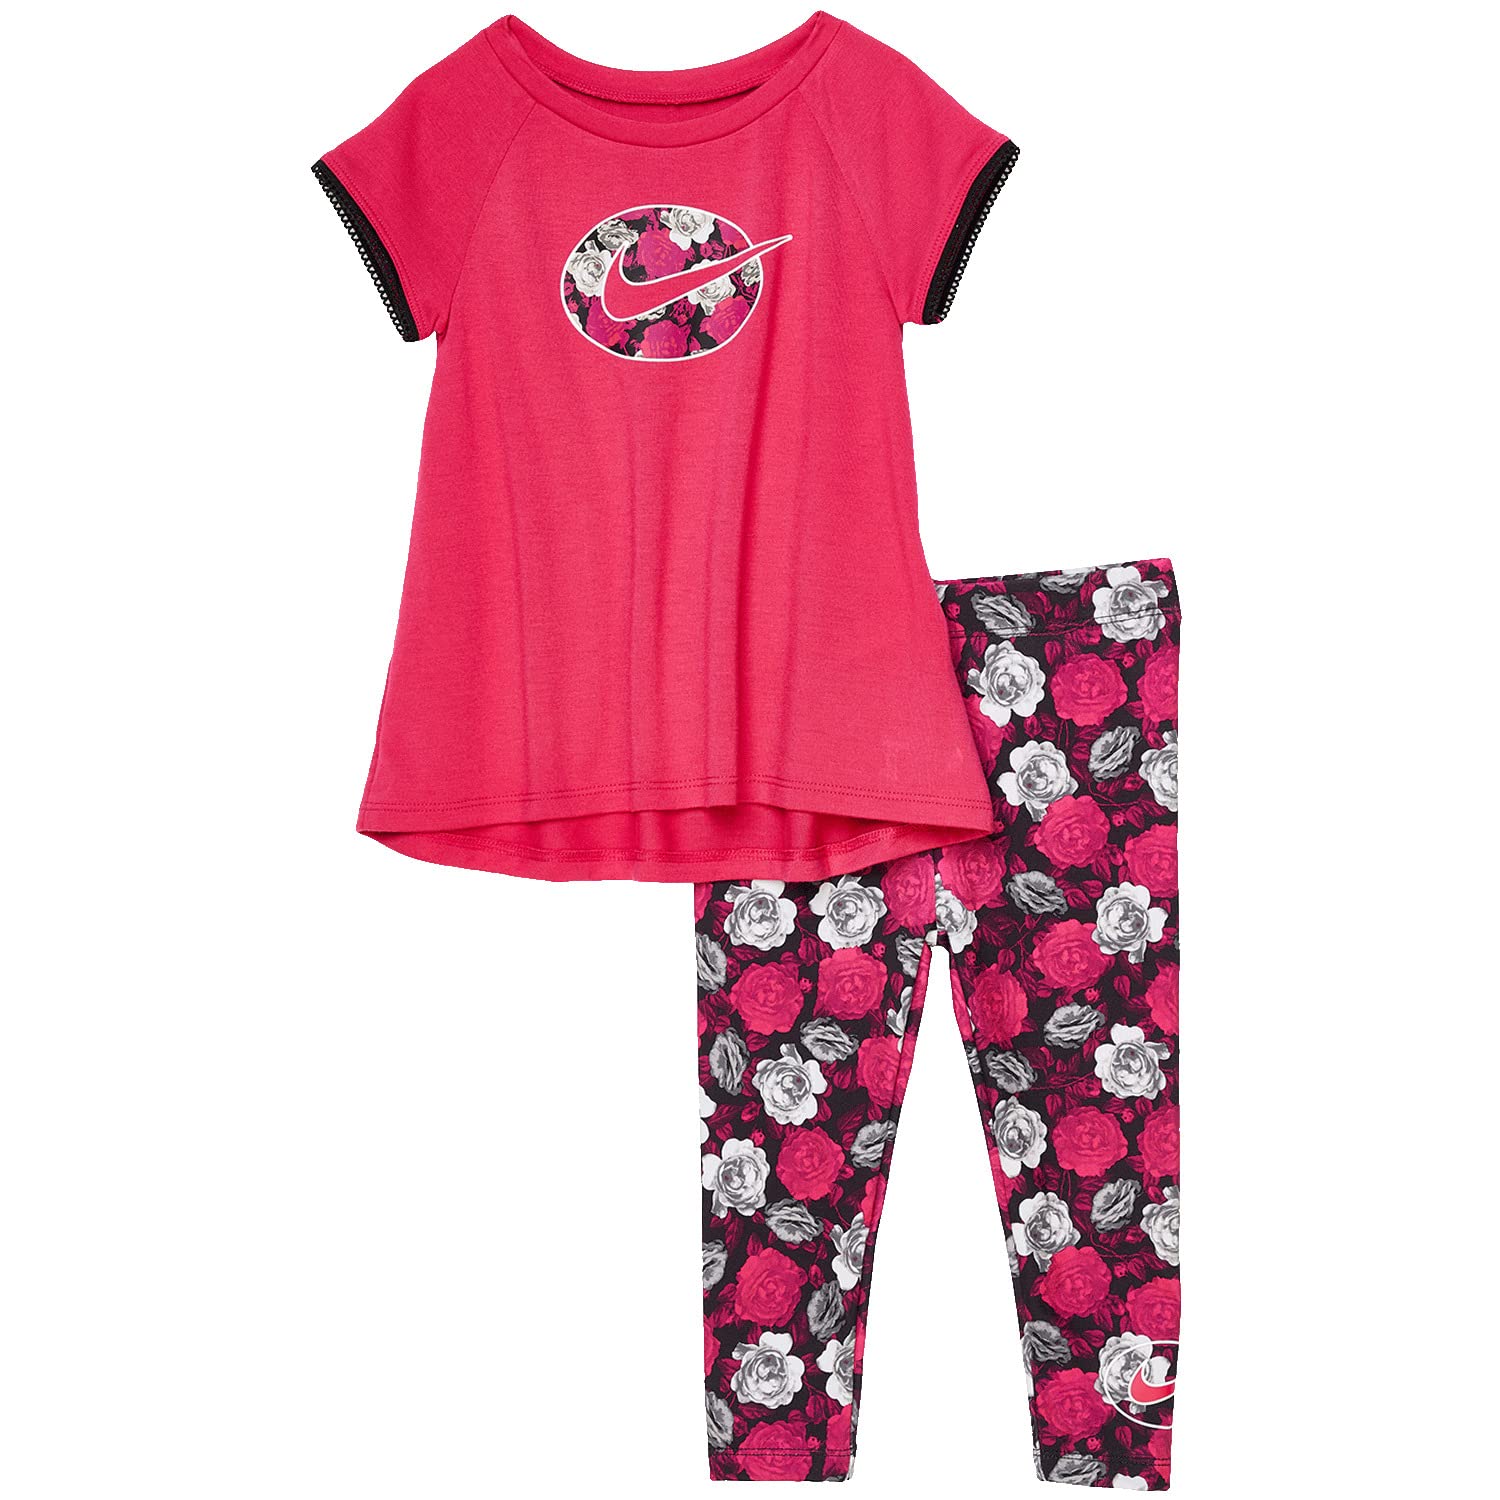 Image 1 of Printed Tunic and Leggings Set (Infant)